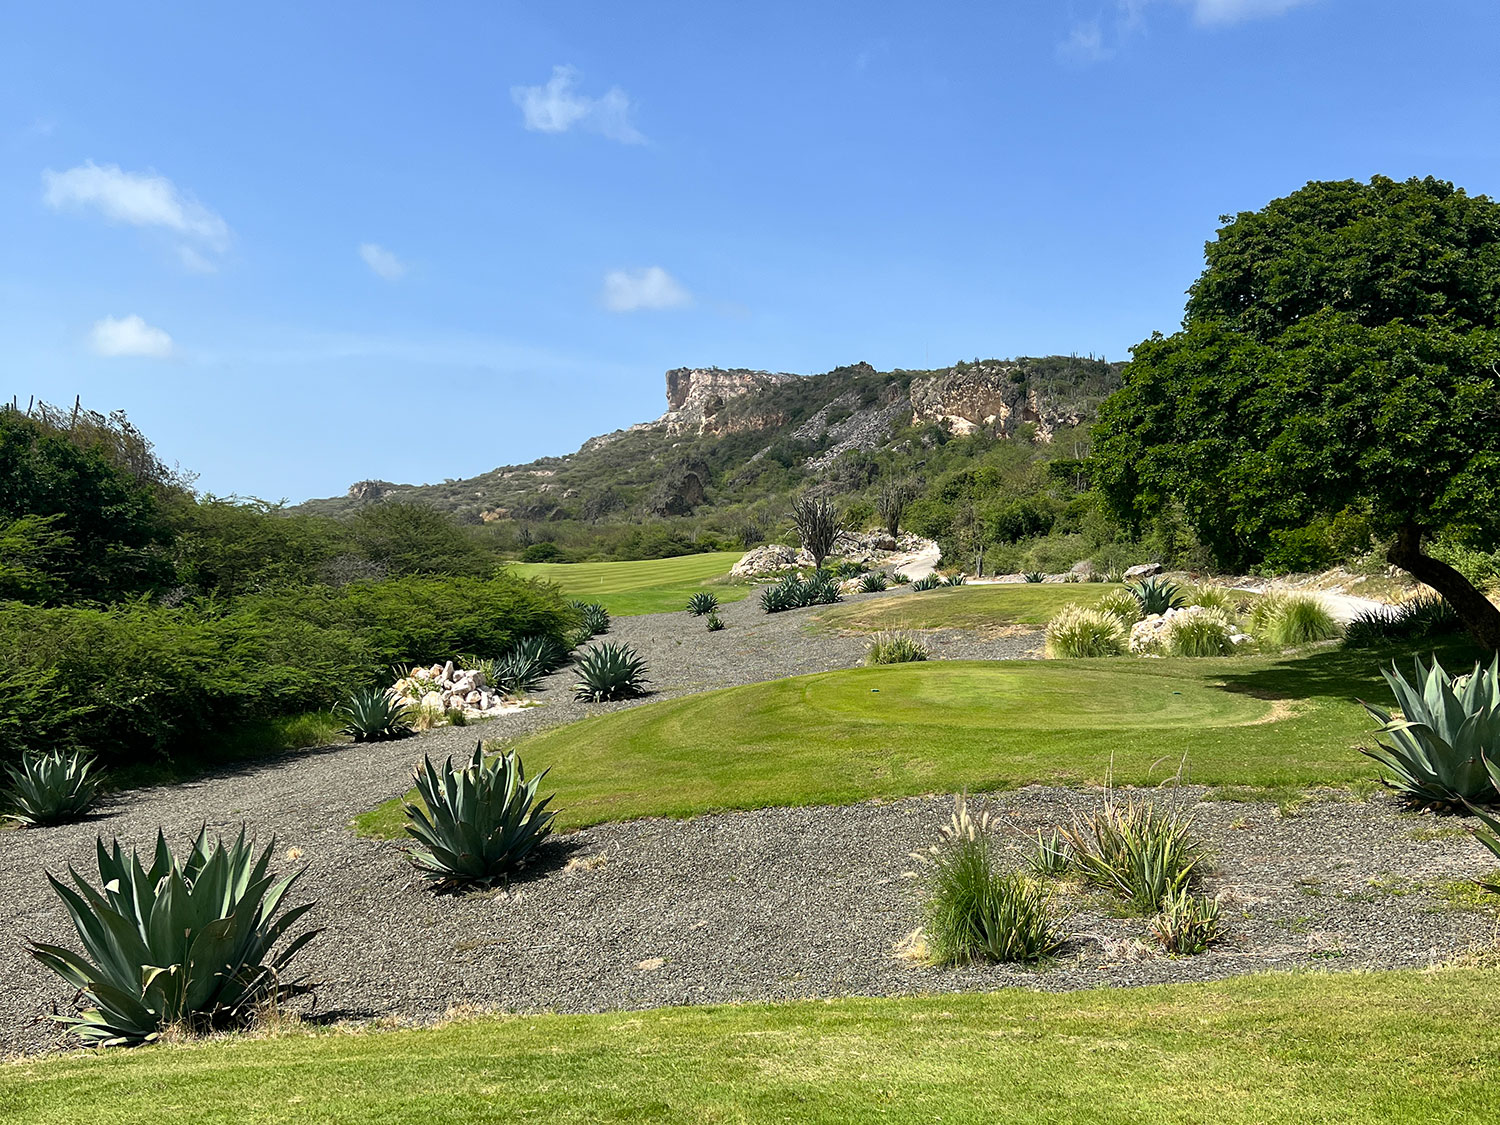 The view from the tee box on Hole 4 at Old Quarry Golf Course on the Dutch Caribbean island of Curaçao.